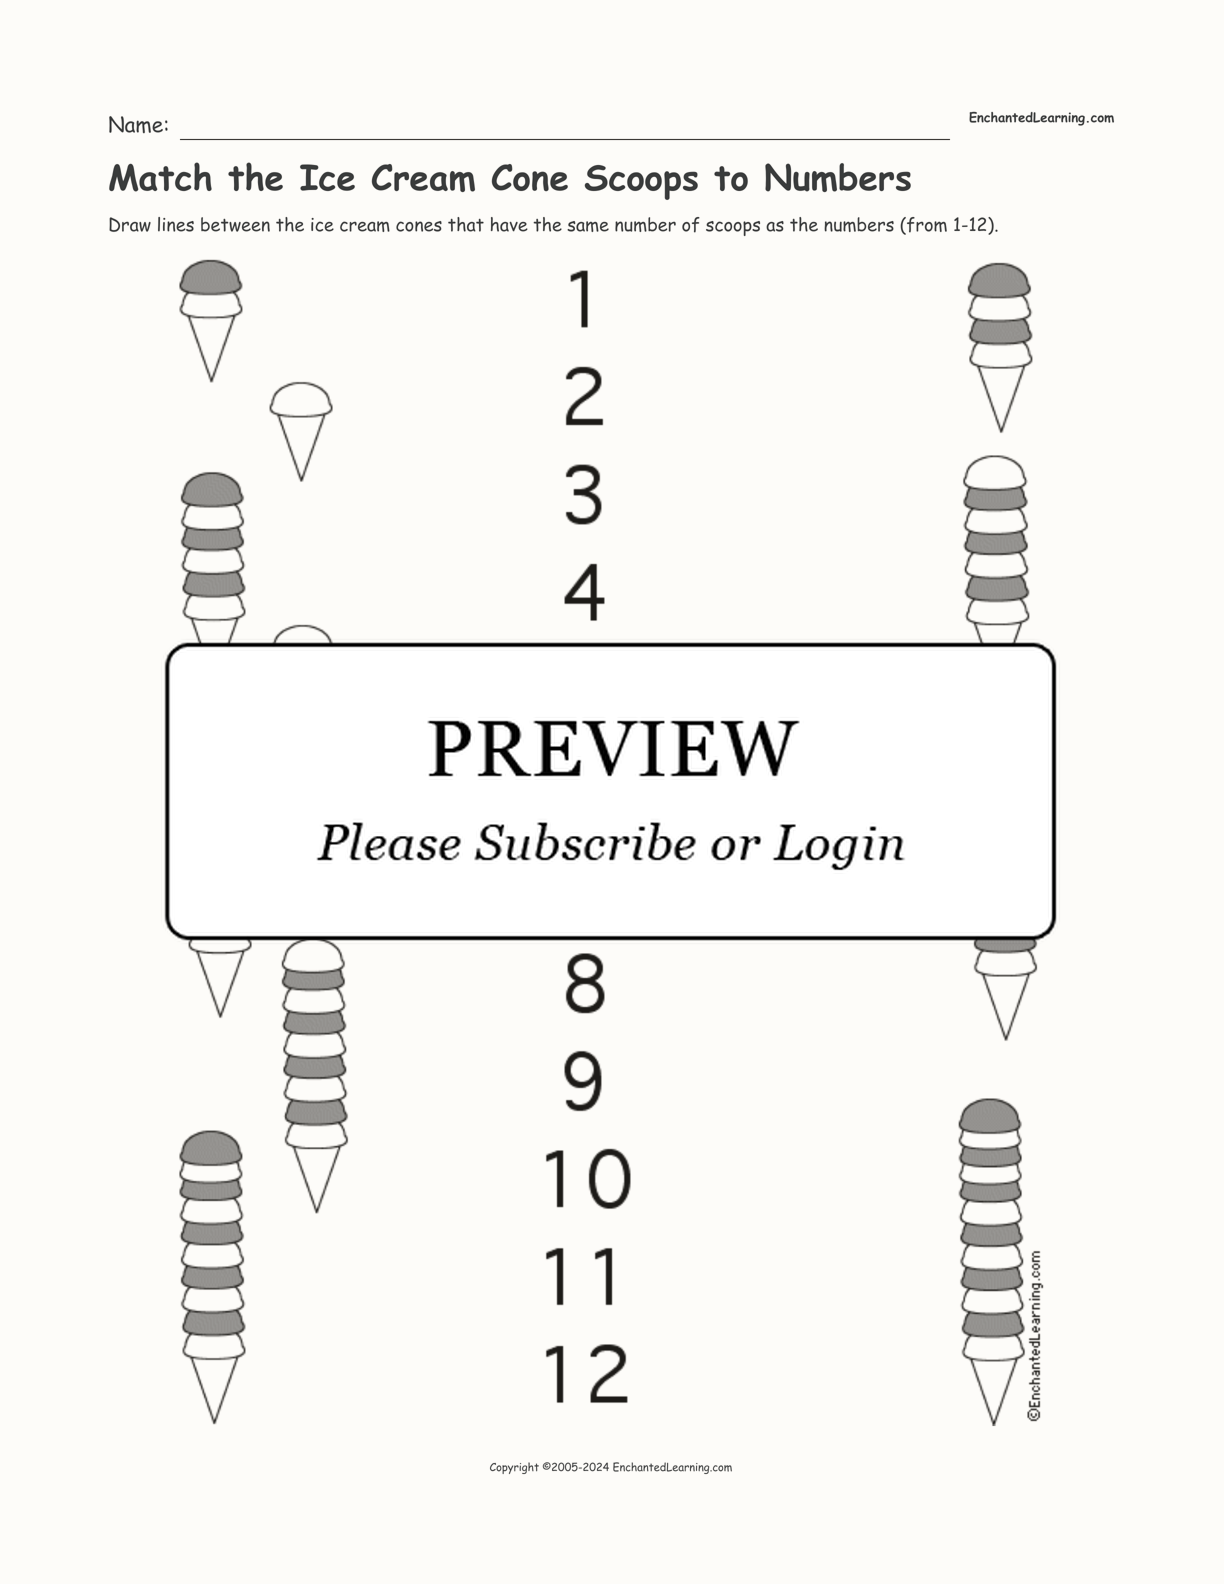 Match the Ice Cream Cone Scoops to Numbers interactive worksheet page 1